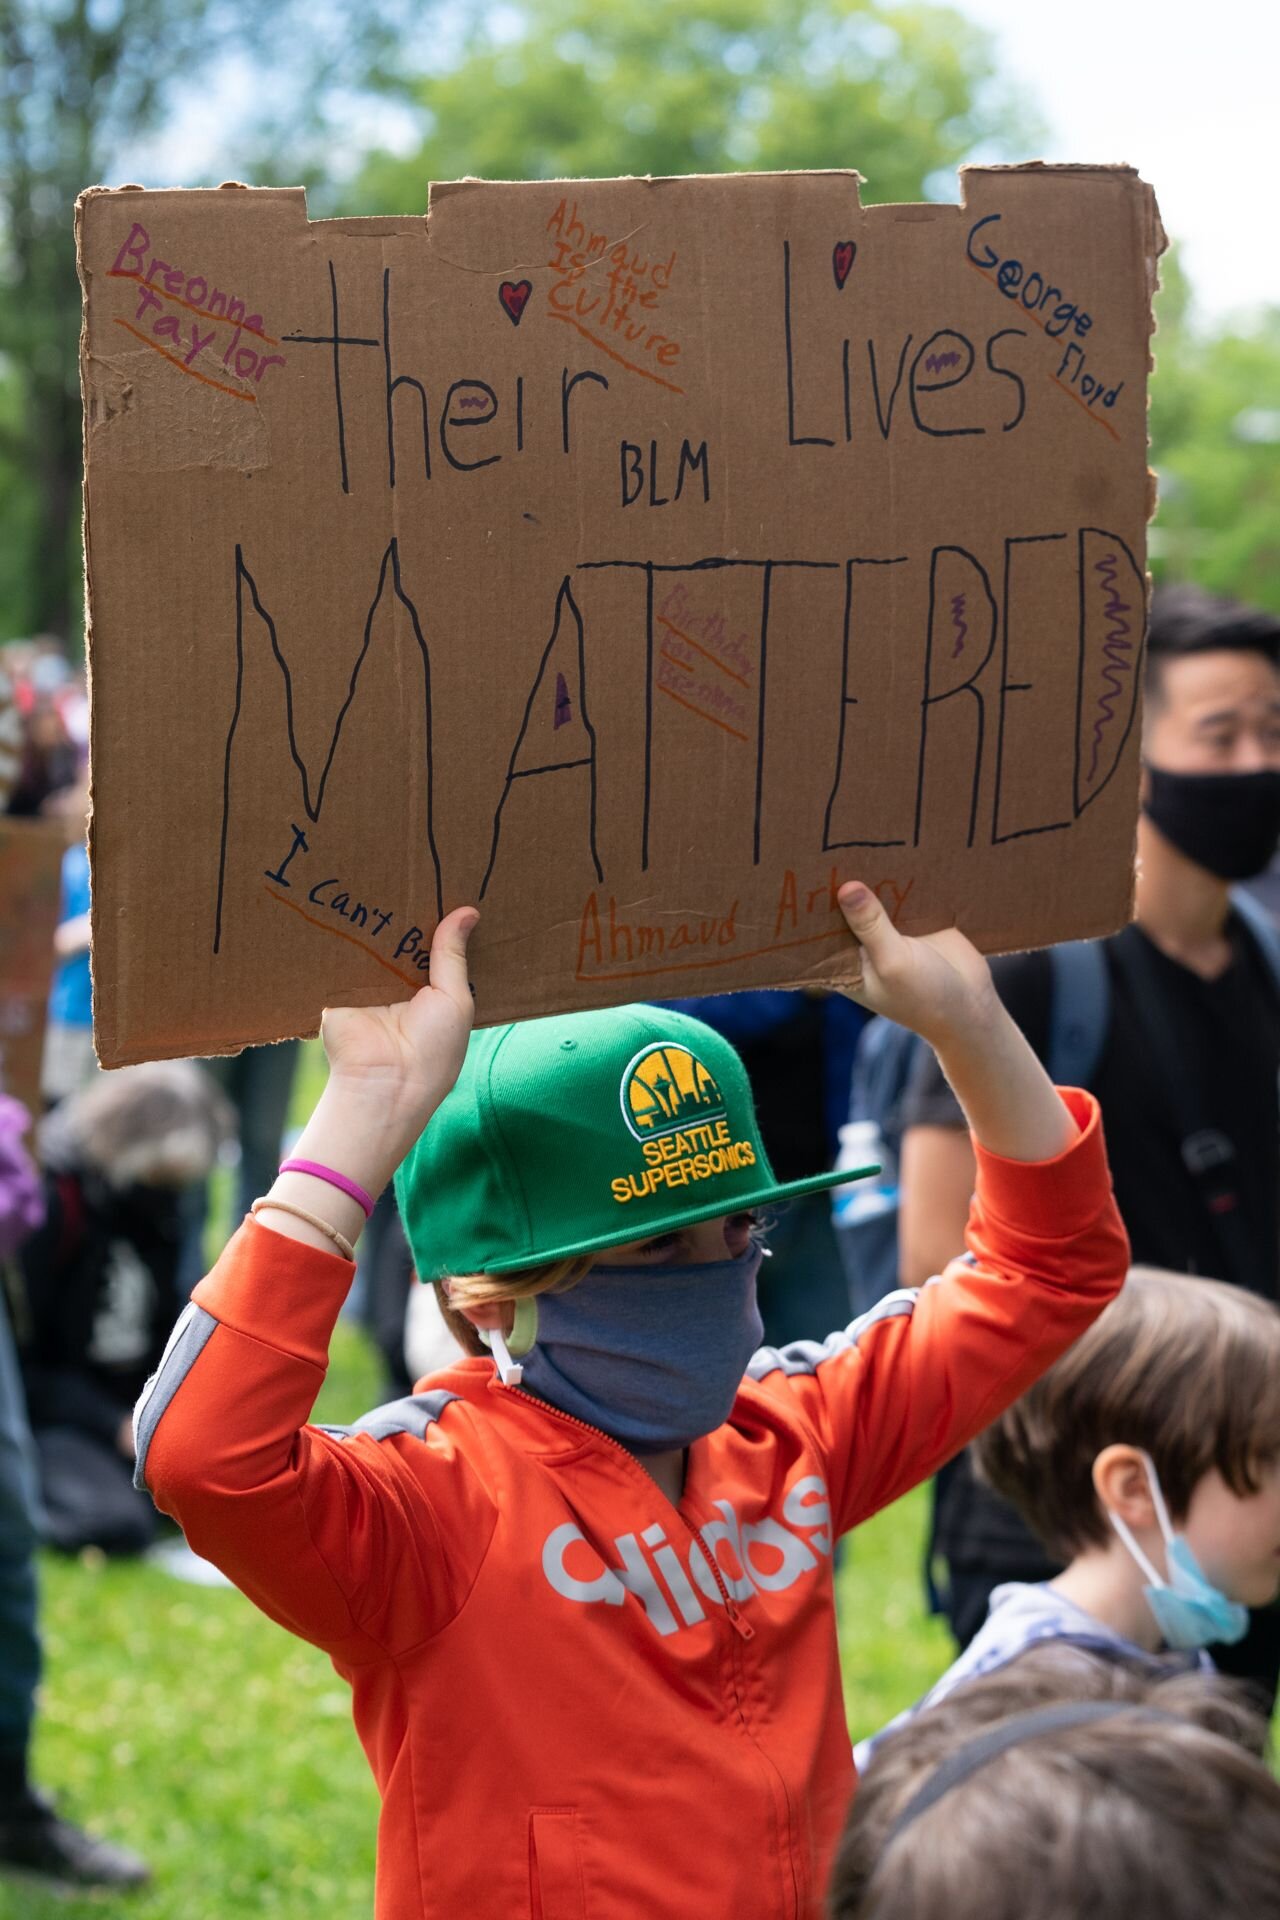  An elementary student holds a handmade sign at the Seattle Children’s March organized by youth in response to police violence and the death of George Floyd in Seattle, Wash. June 13, 2020 